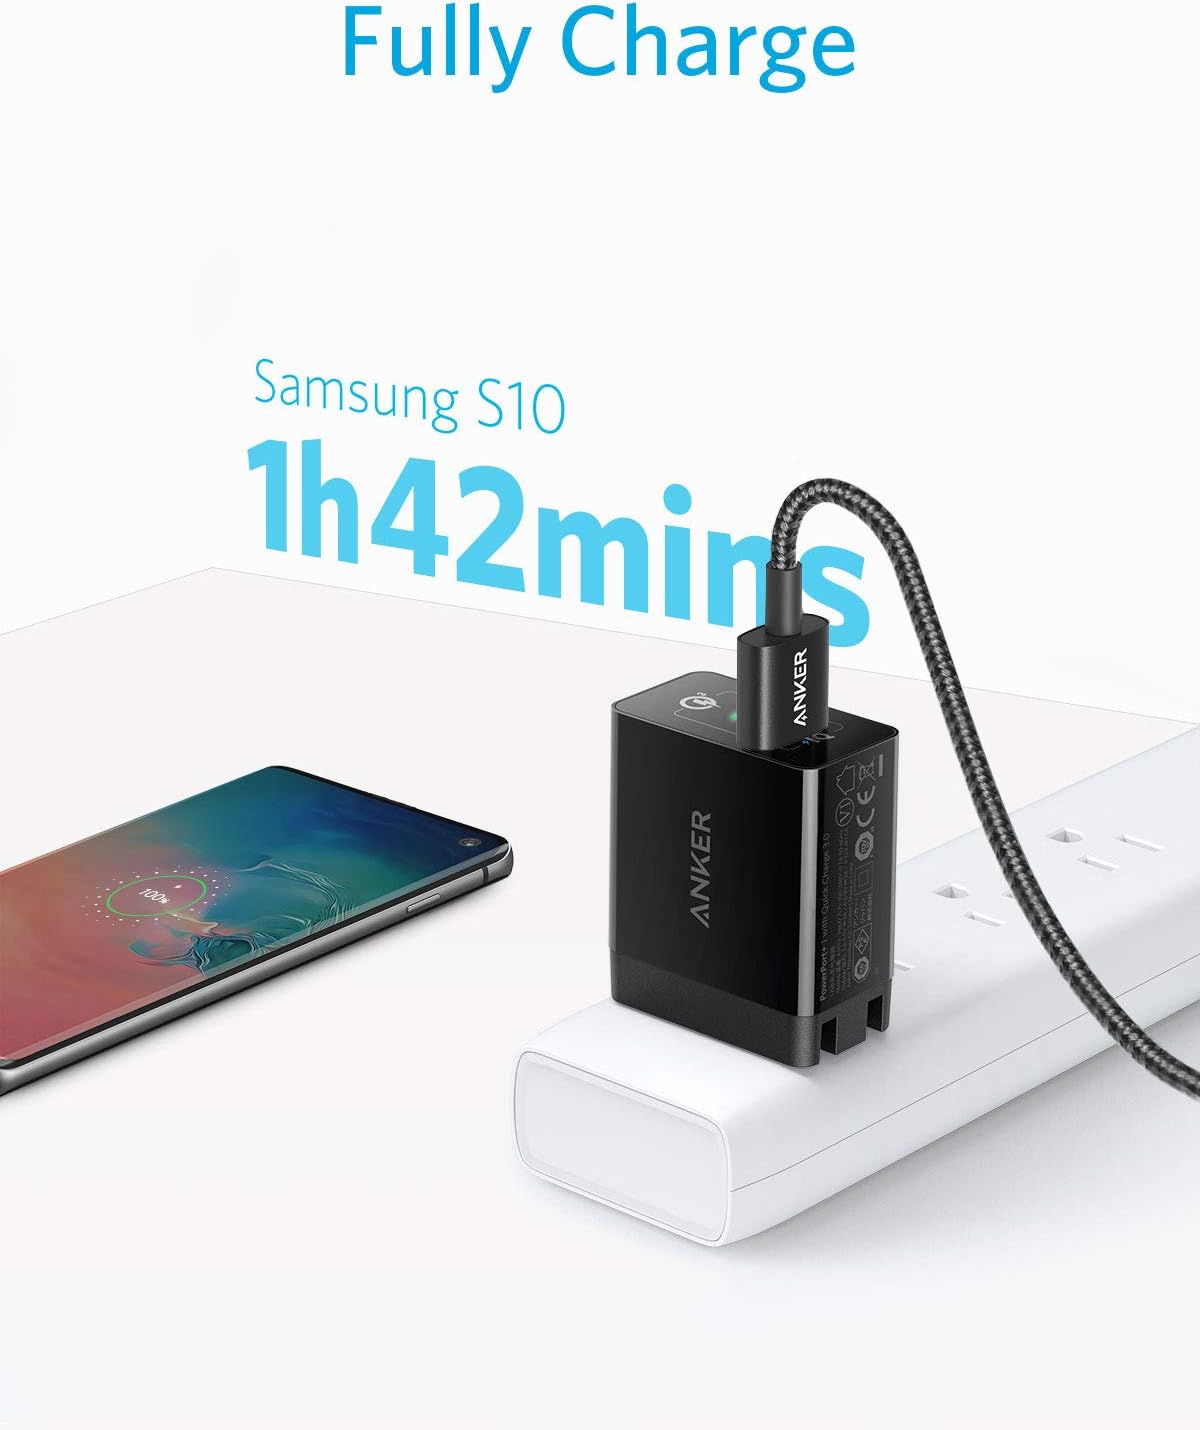 Quick Charge 3.0, Anker 18W Wall Charger (Quick Charge 2.0 Compatible) Powerport+ 1 for Wireless Charger, Galaxy S10e/S10/S9, Note 9/8, LG G7, iPhone and More (USB-A to USB-C Cable Included)